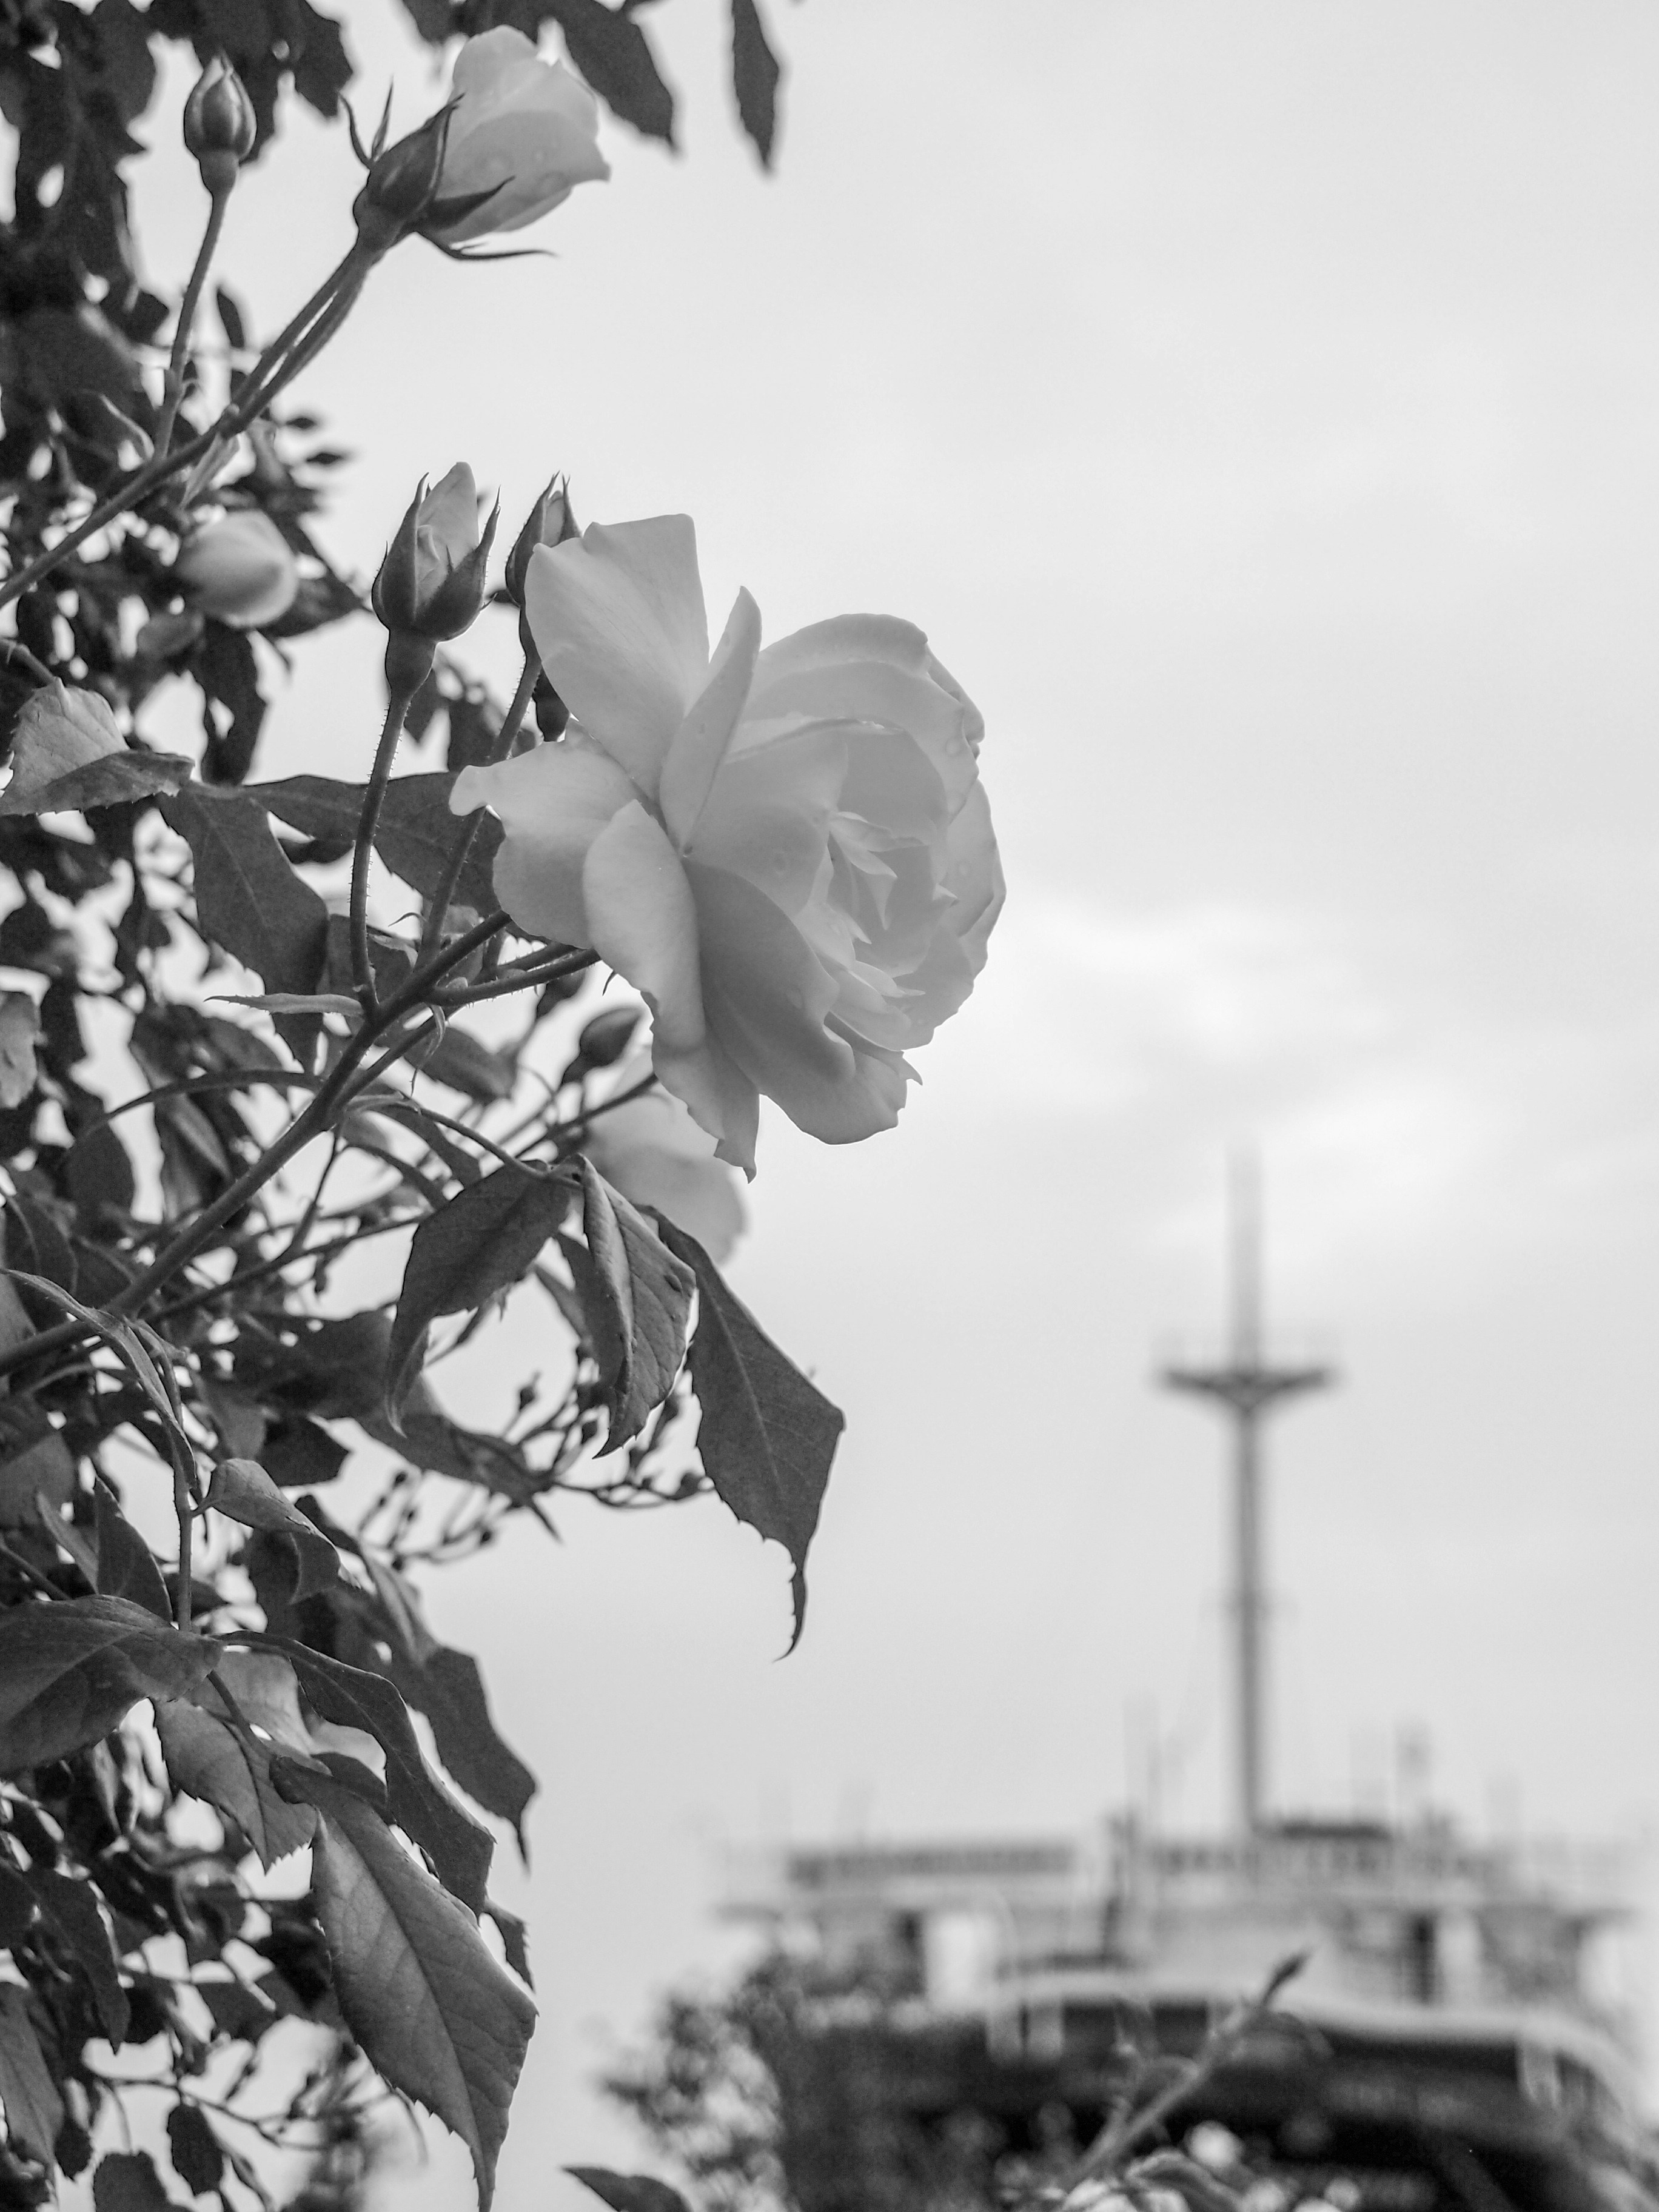 Choose from a curated selection of rose photos. Always free on Unsplash.